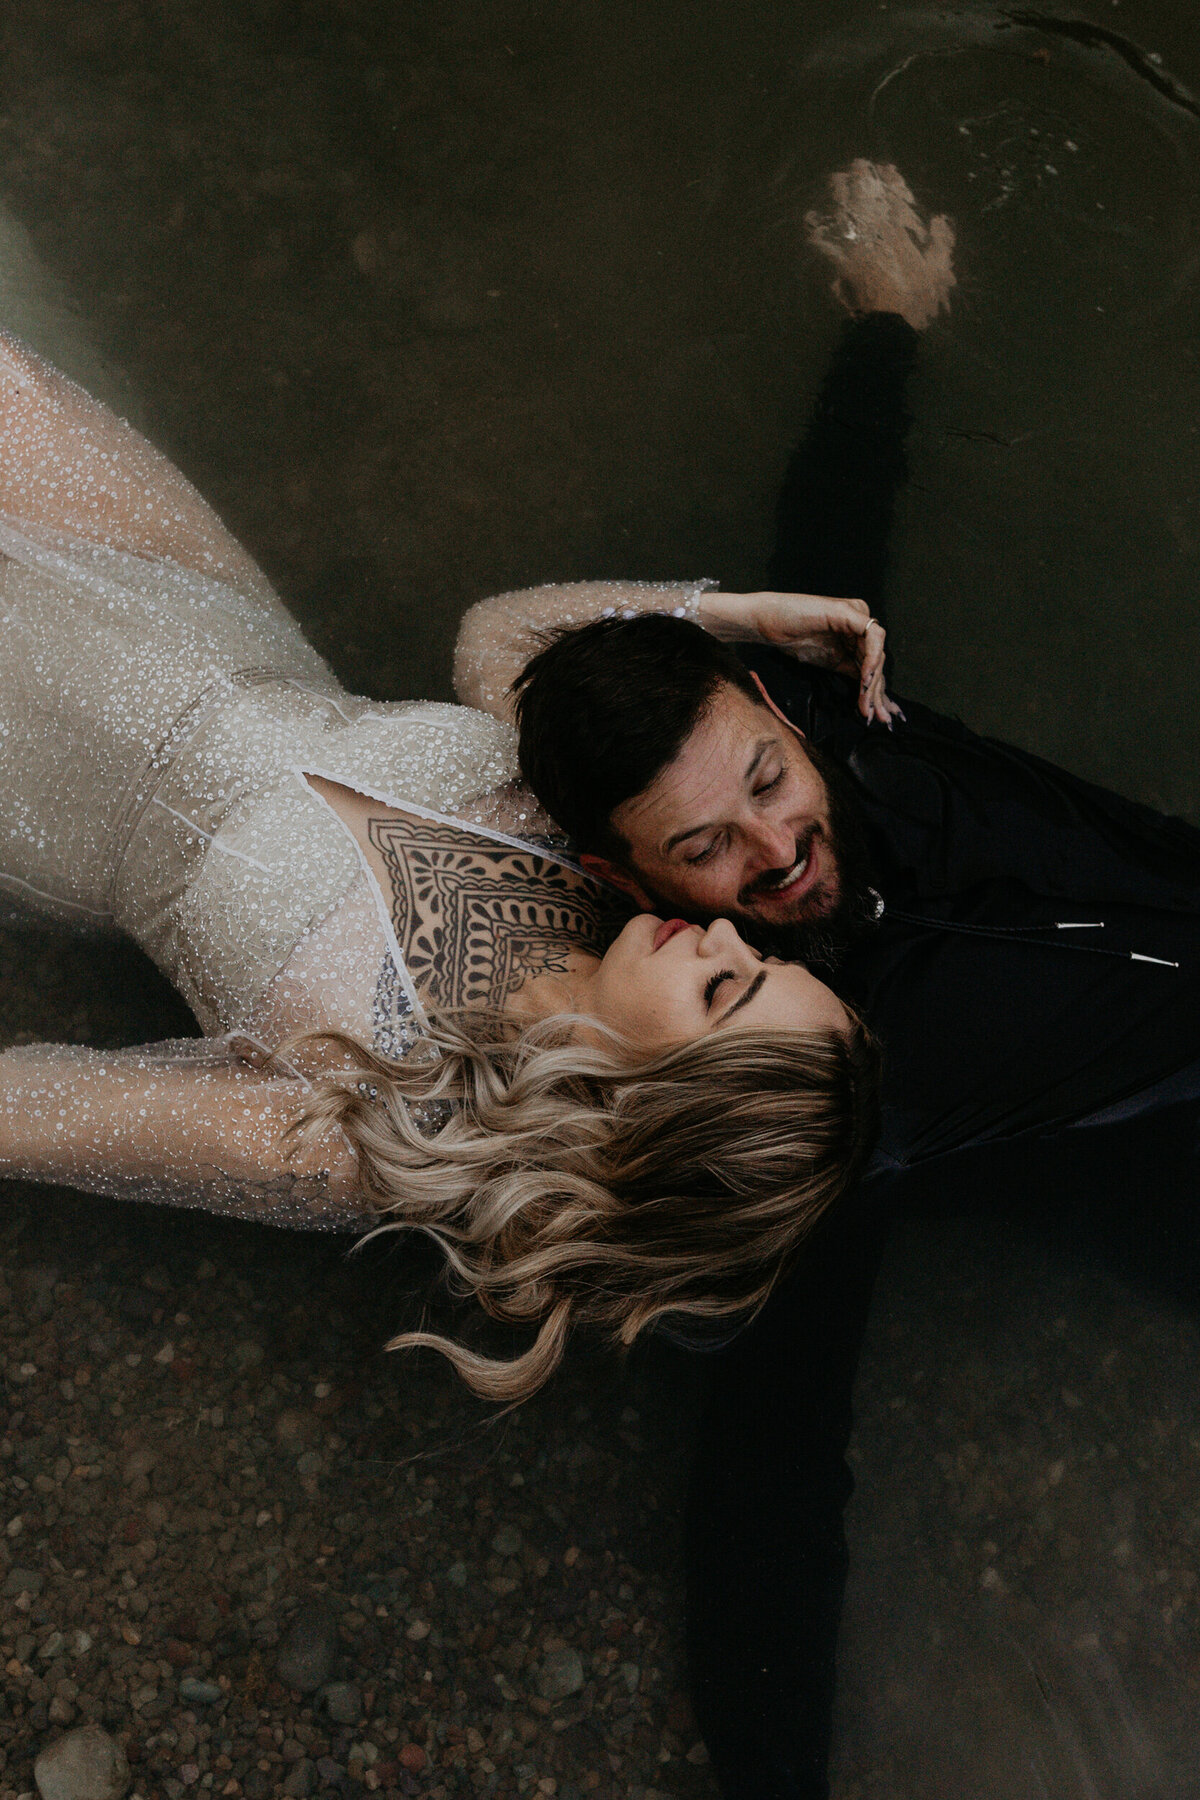 bride and groom laying together in a pond in their wedding attire